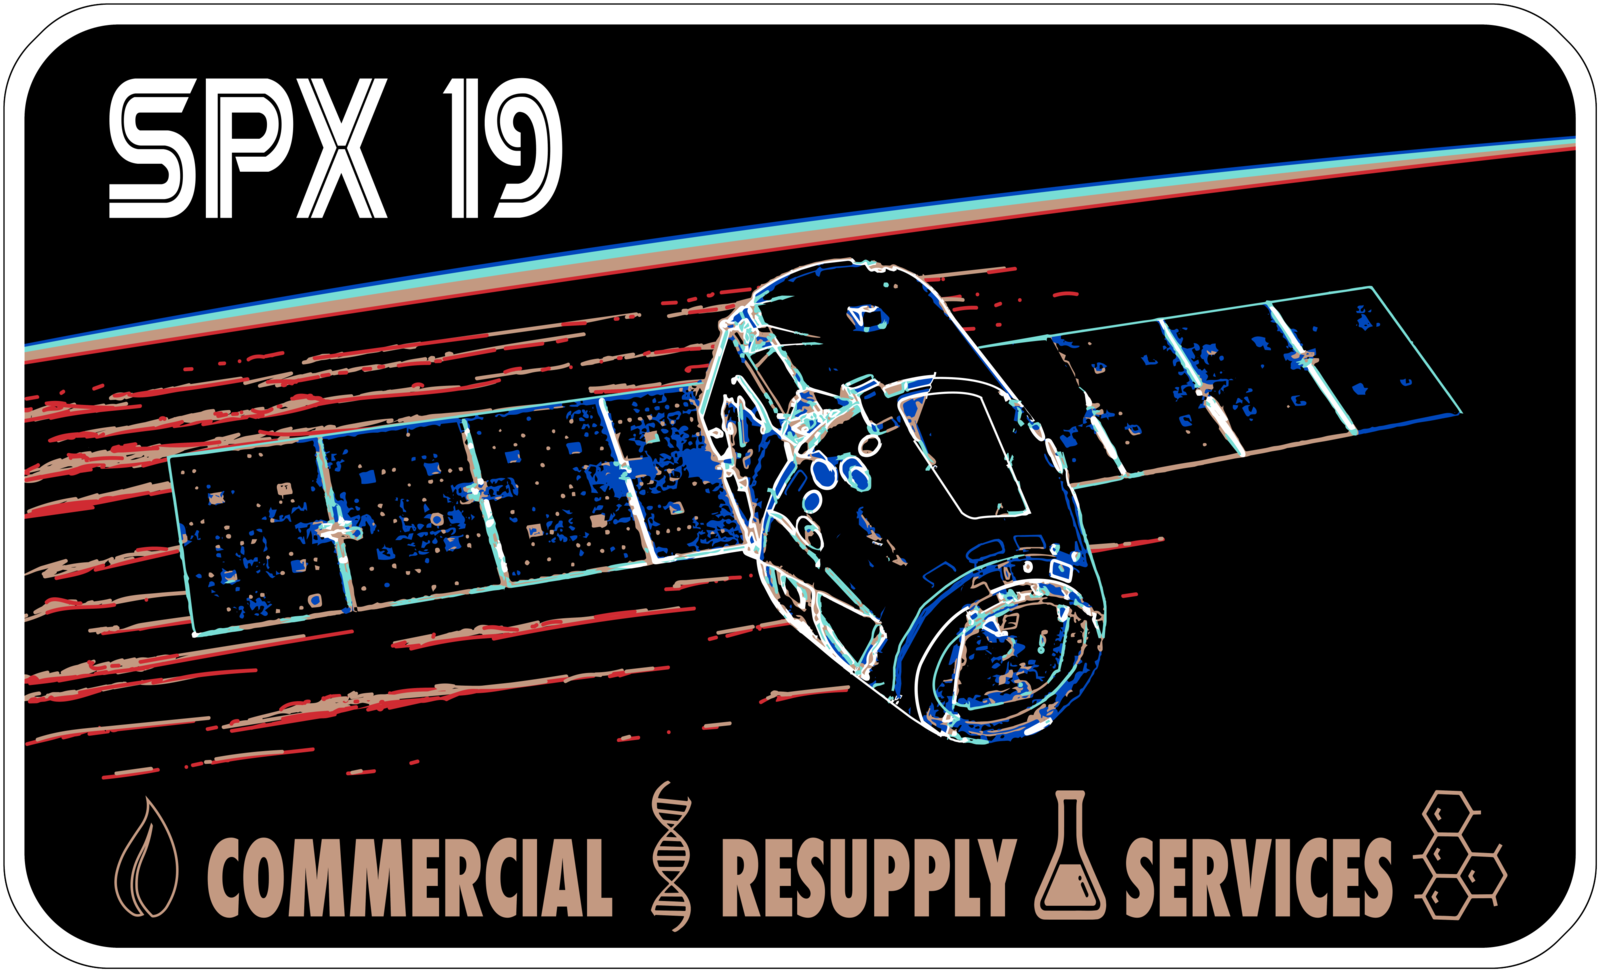 Mission patch for SpX CRS-19